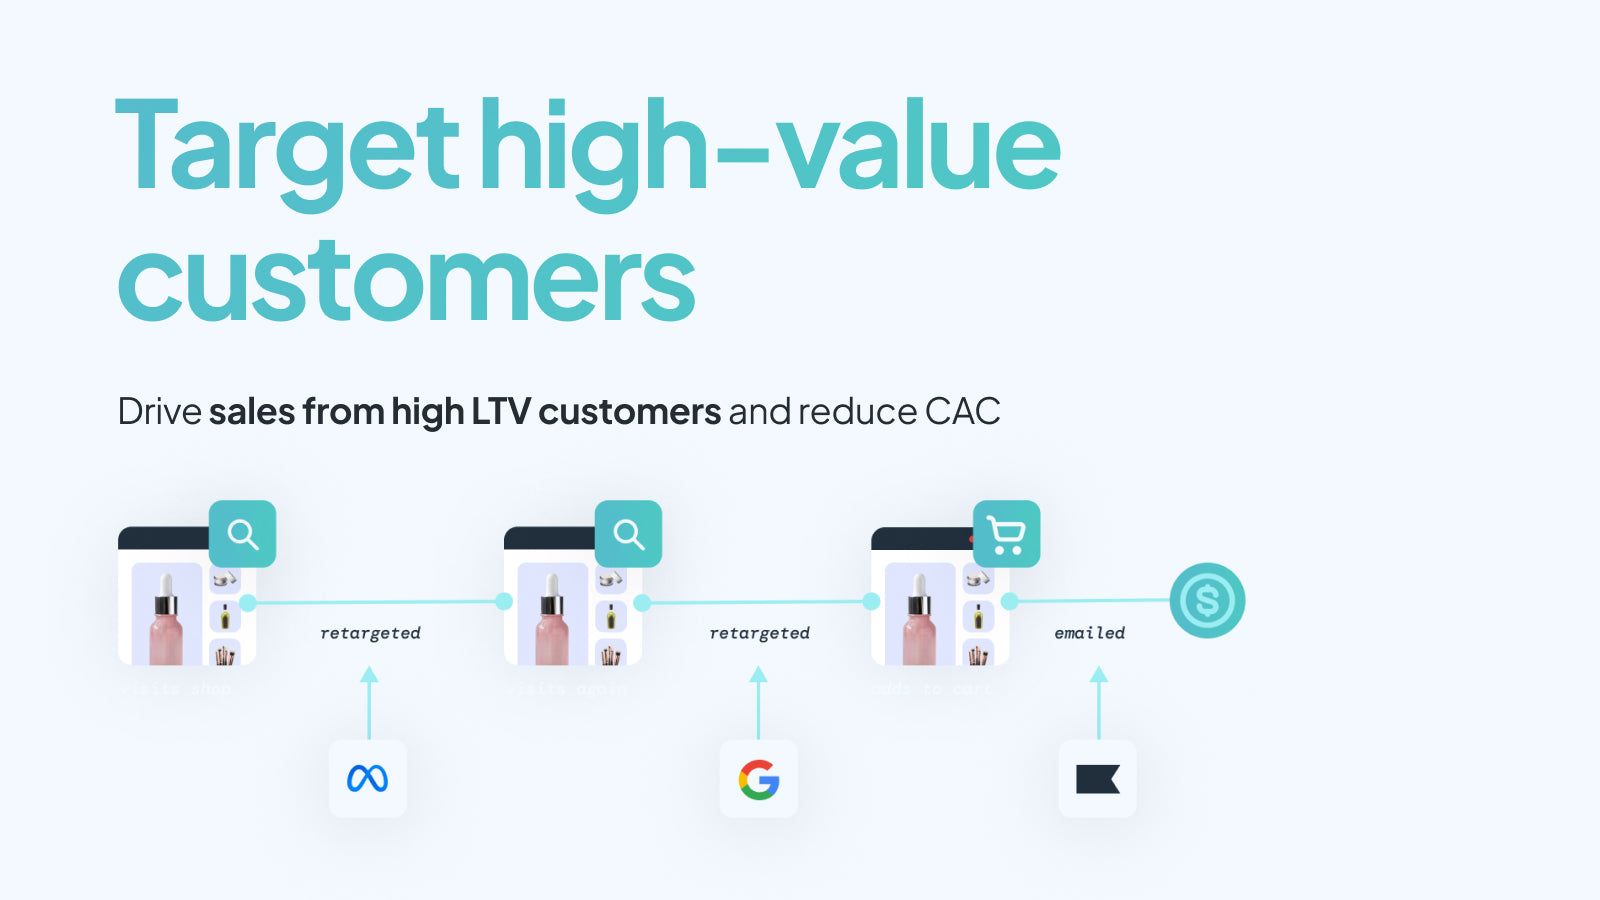 Target high-value customers to drive higher LTV and lower CAC